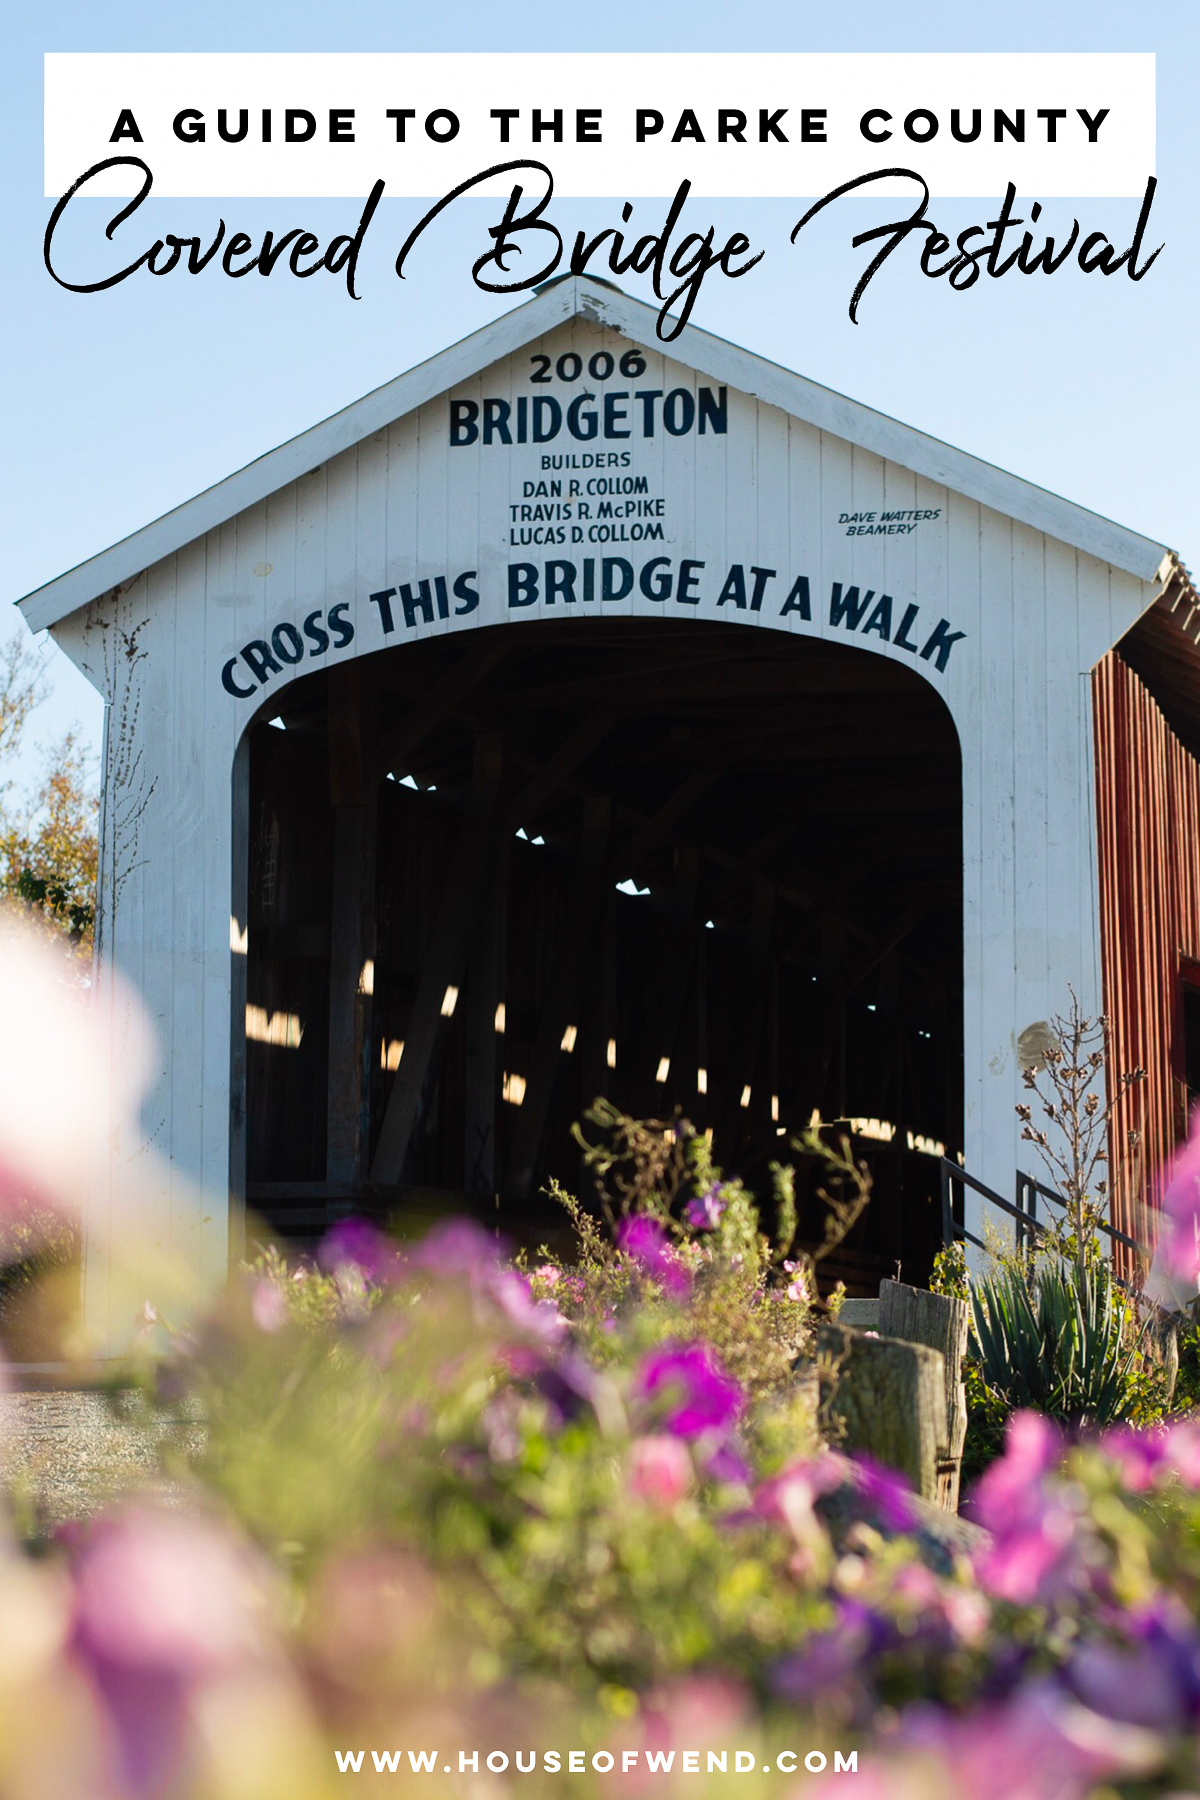 Guide to the Parke County Covered Bridge Festival